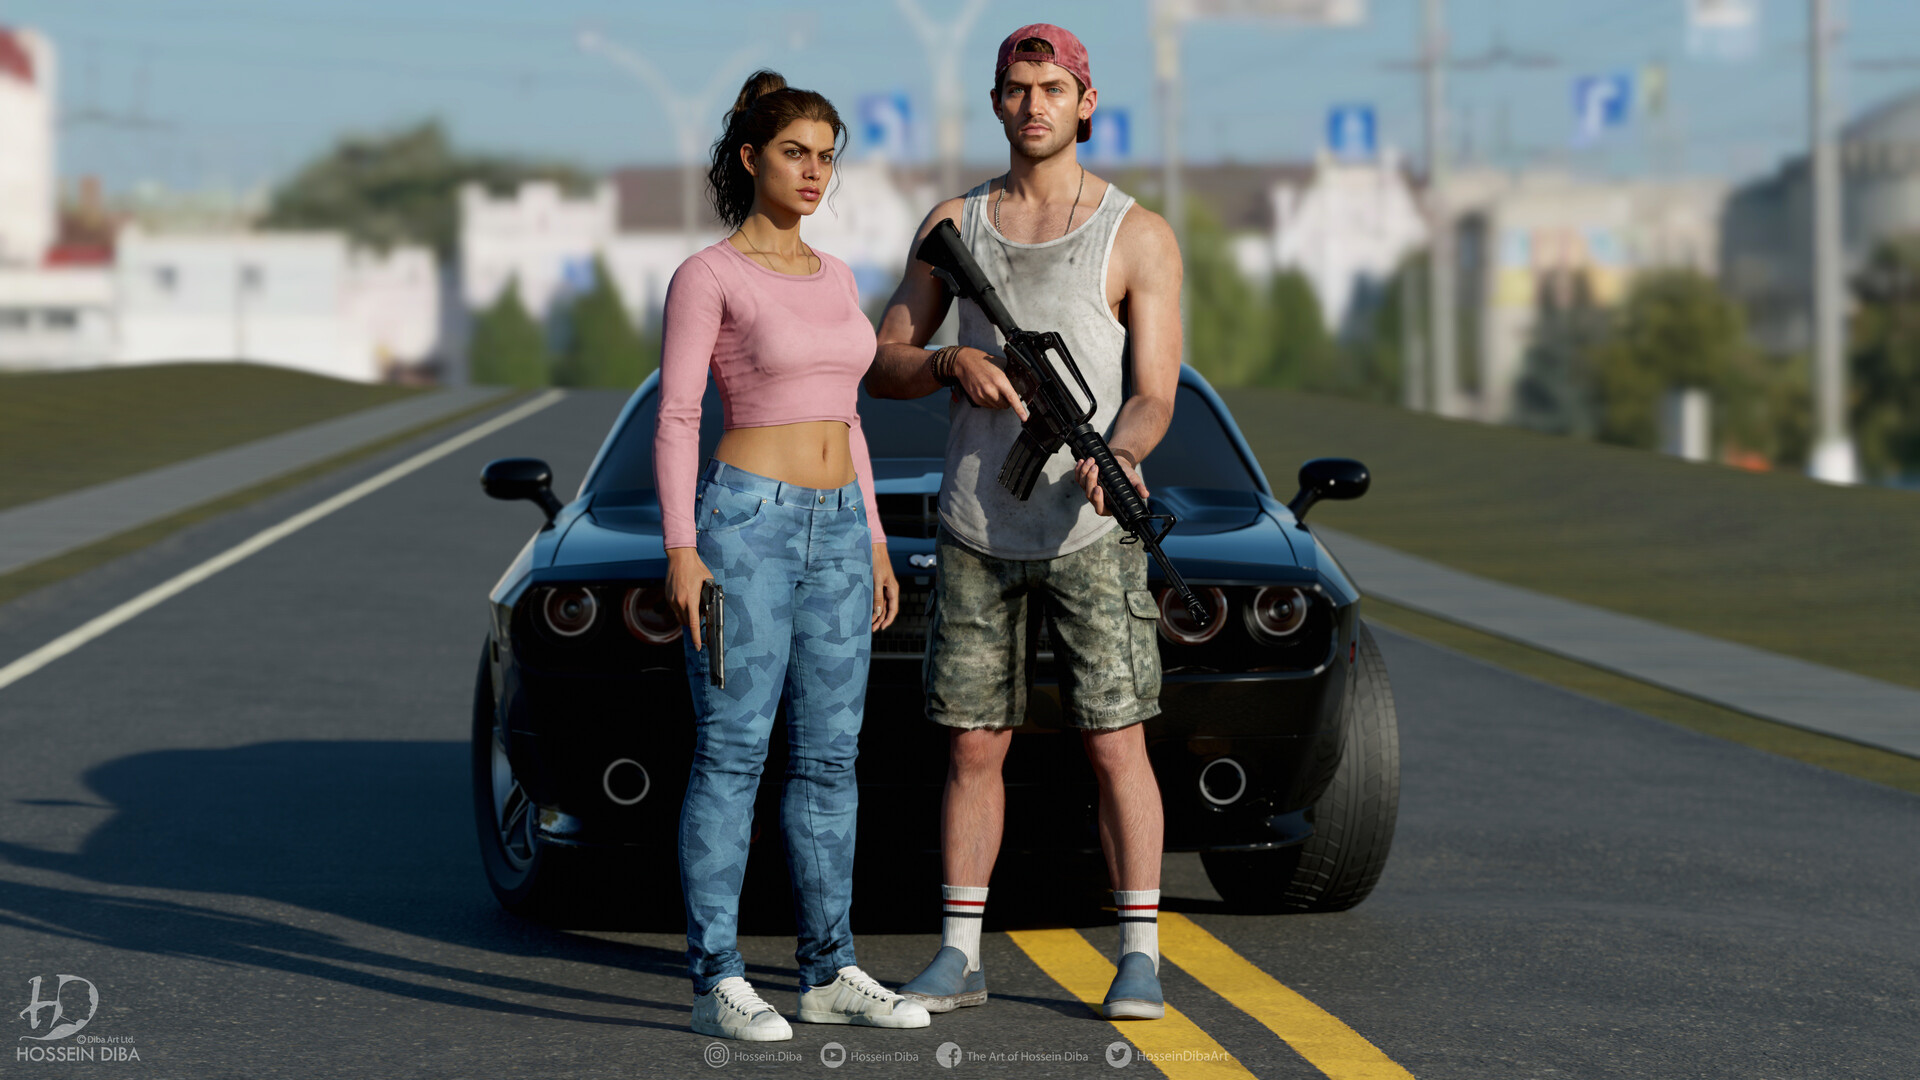 GTA 6 Leaks with Cheating and Romance (Jason & Lucia) 